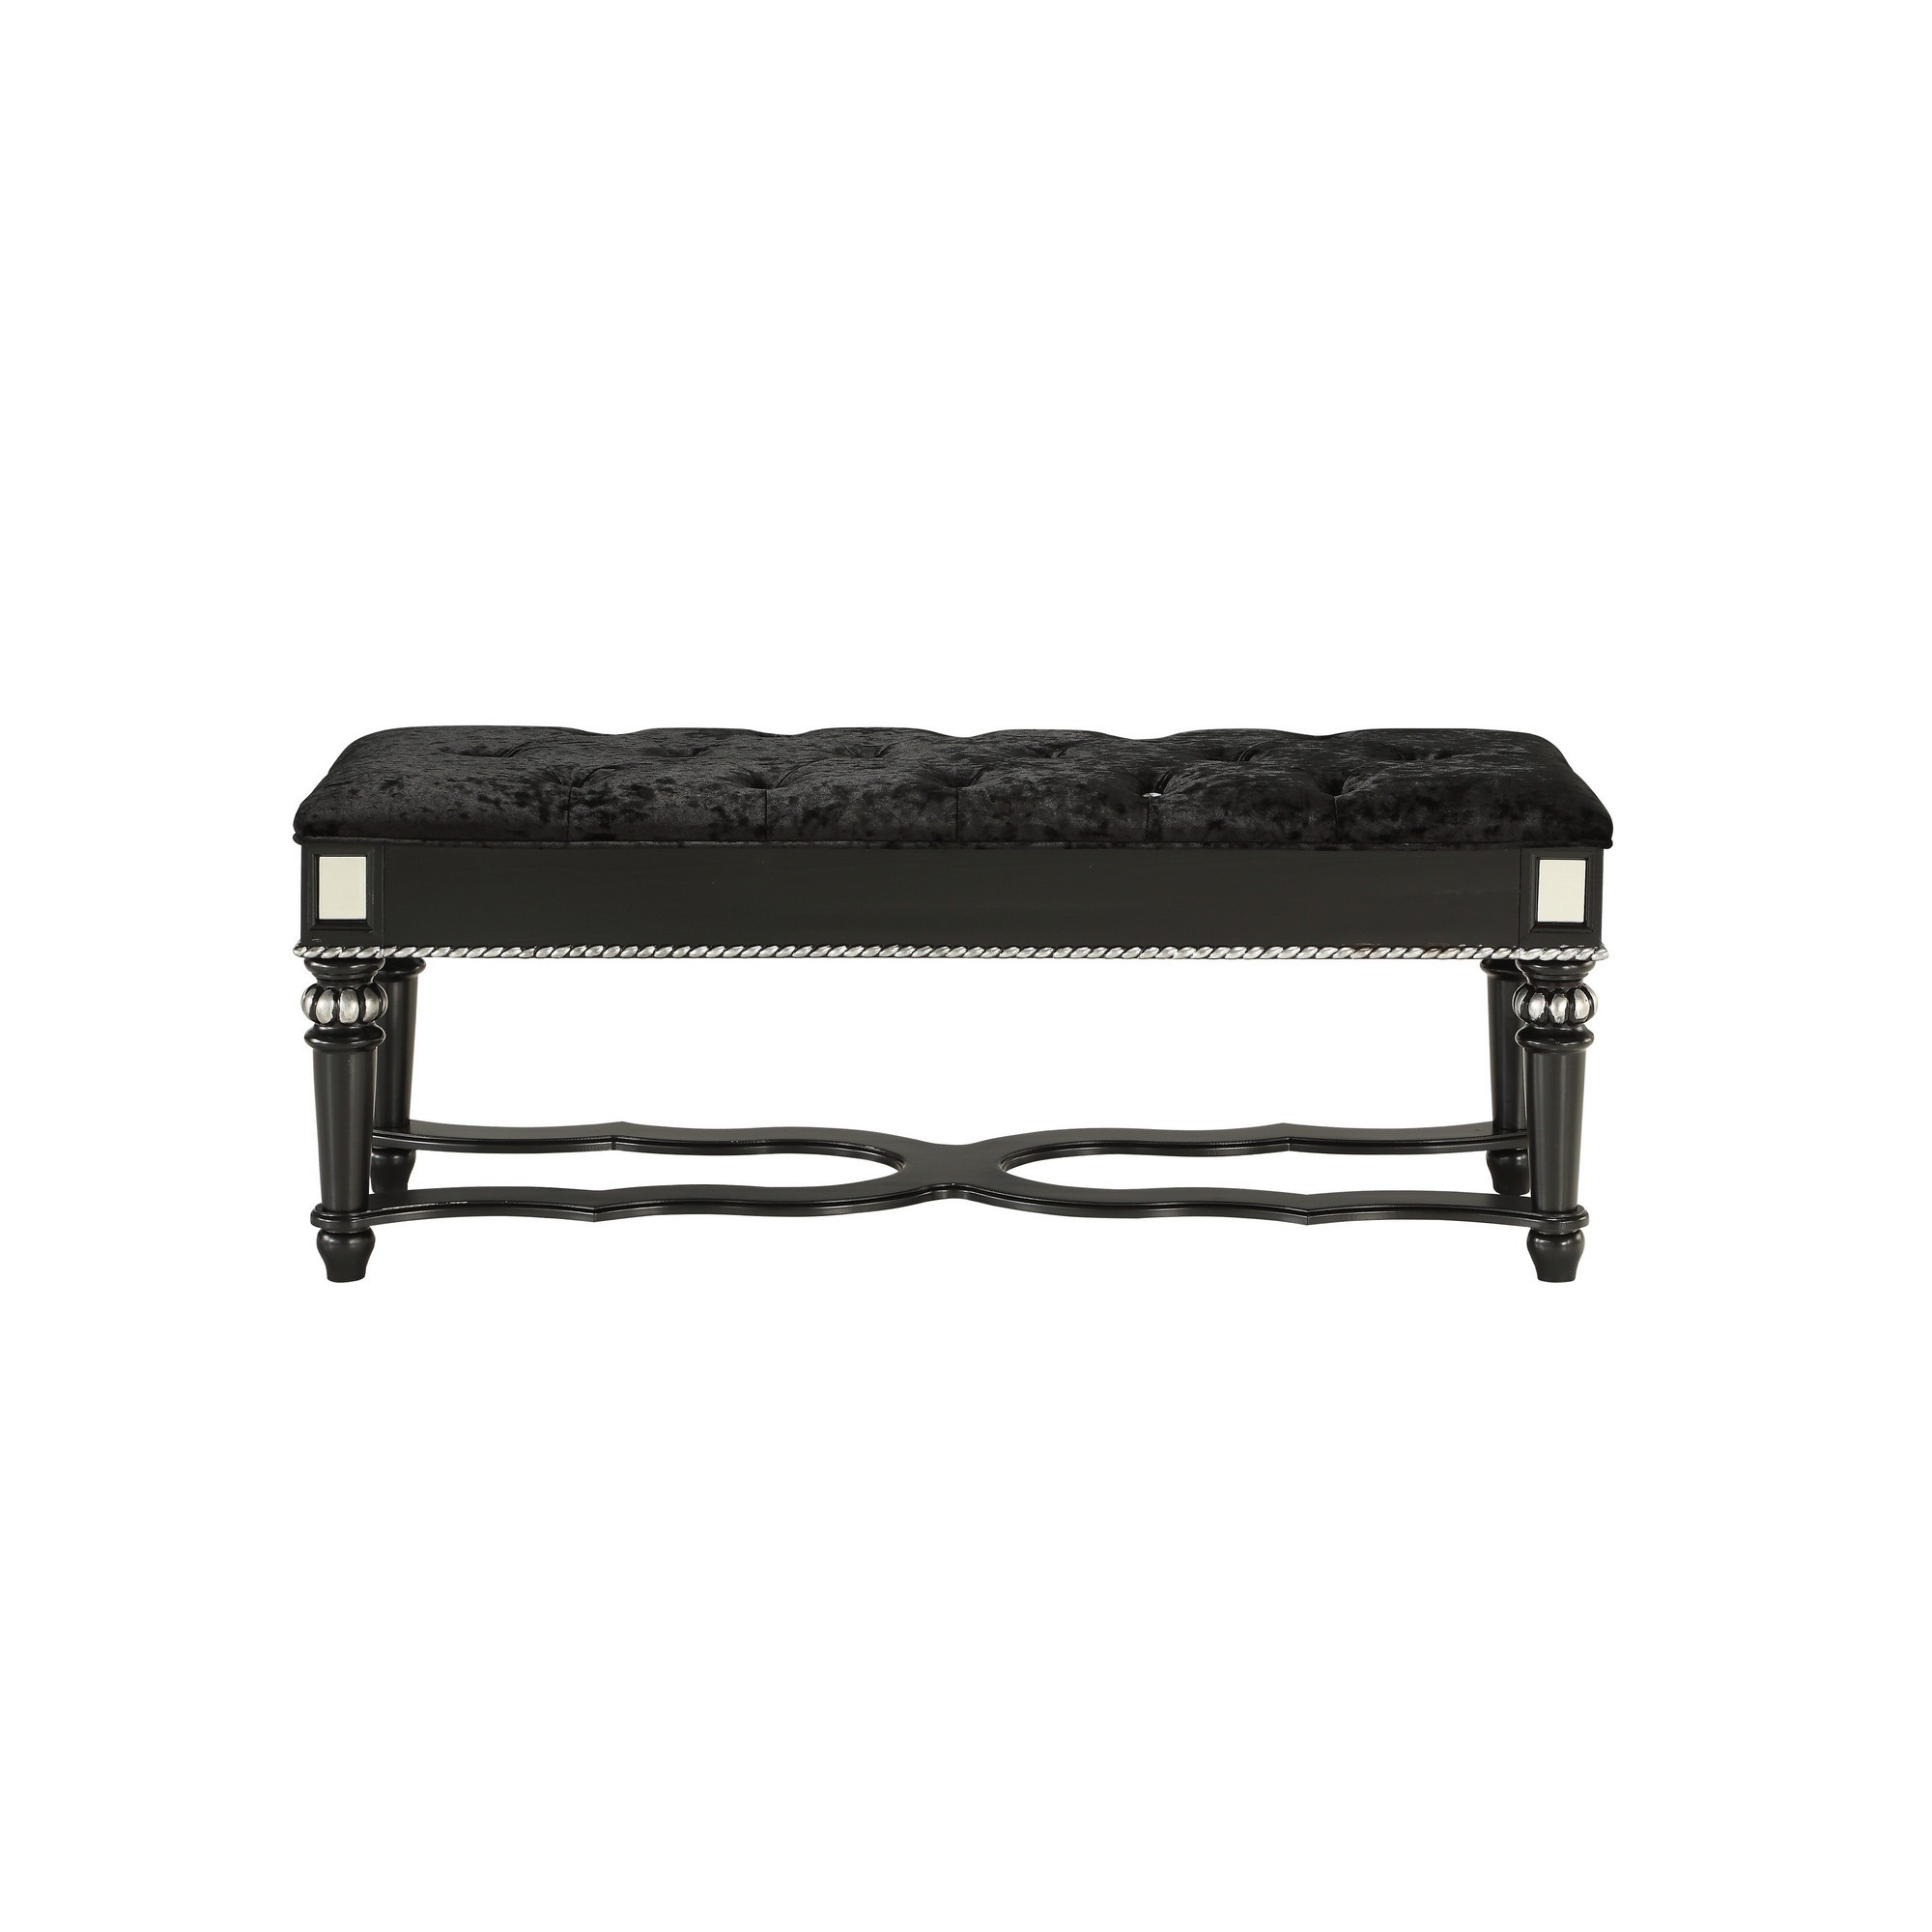 Black Heirloom Appearance Bench with Intricate Carvings